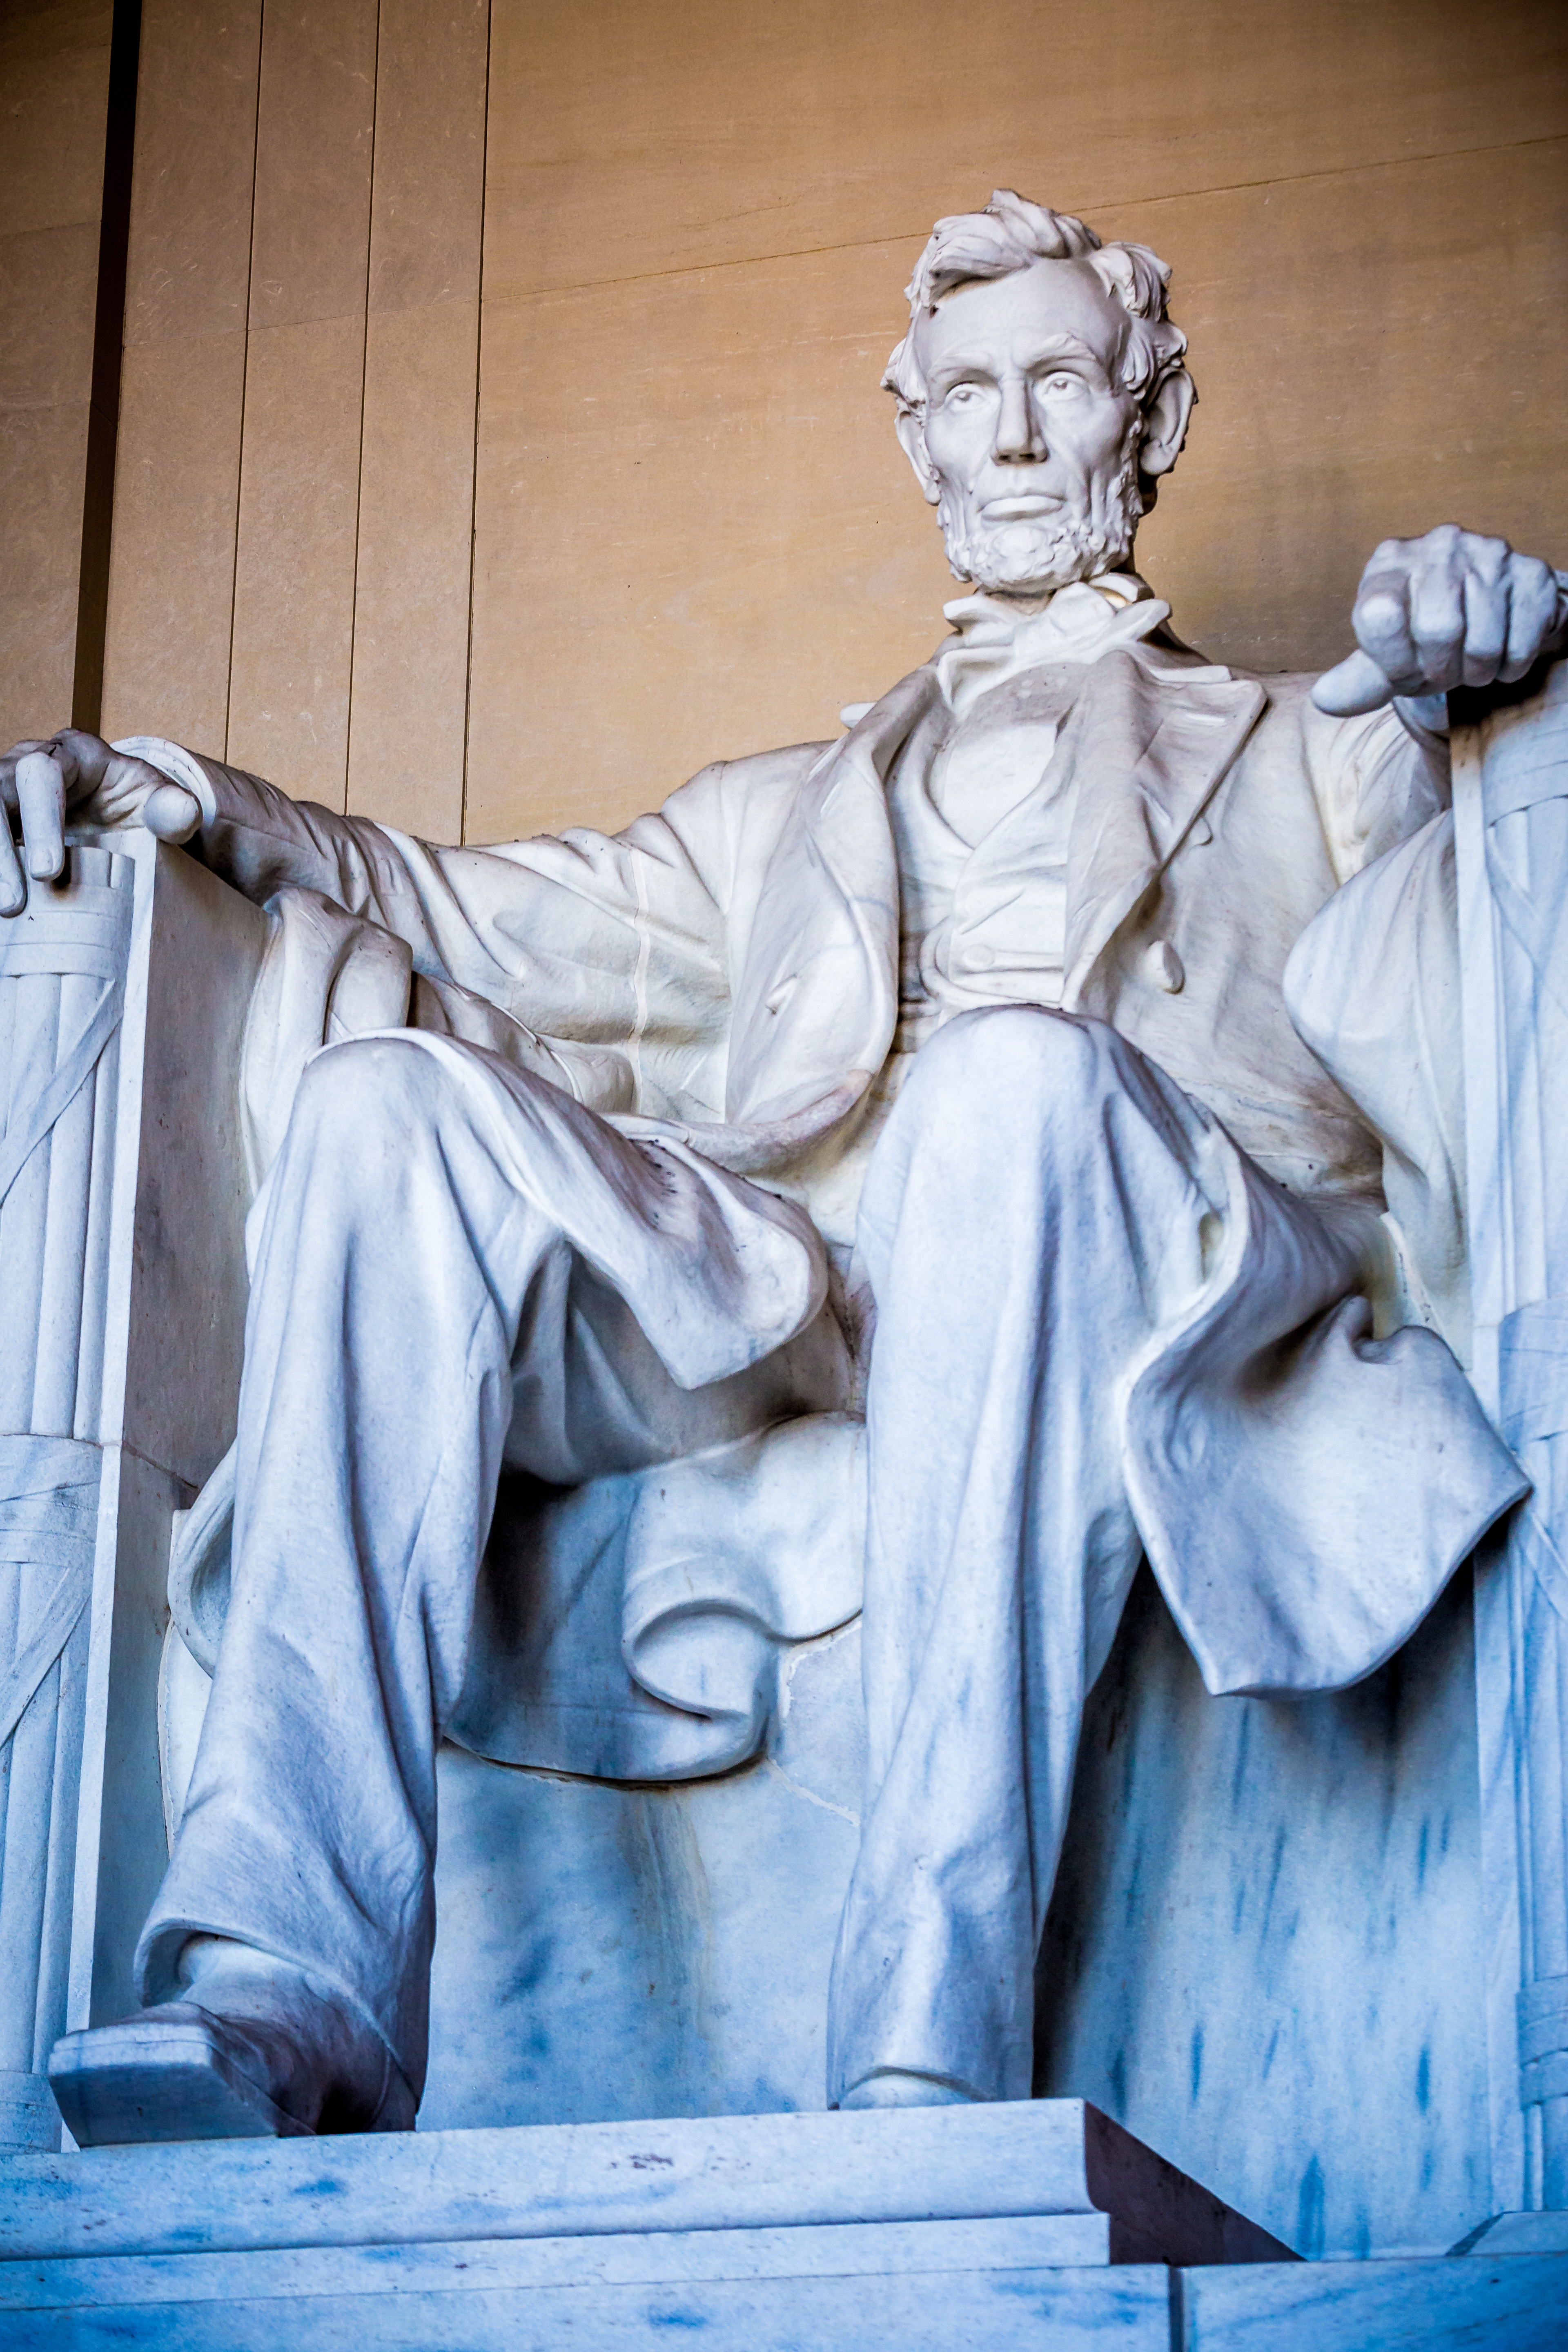 http://www.ppdd.org/wp-content/uploads/2019/02/Abraham-Lincoln-statue-in-the-Lincoln-Memorial-courtesy-of-washington.org_.jpg